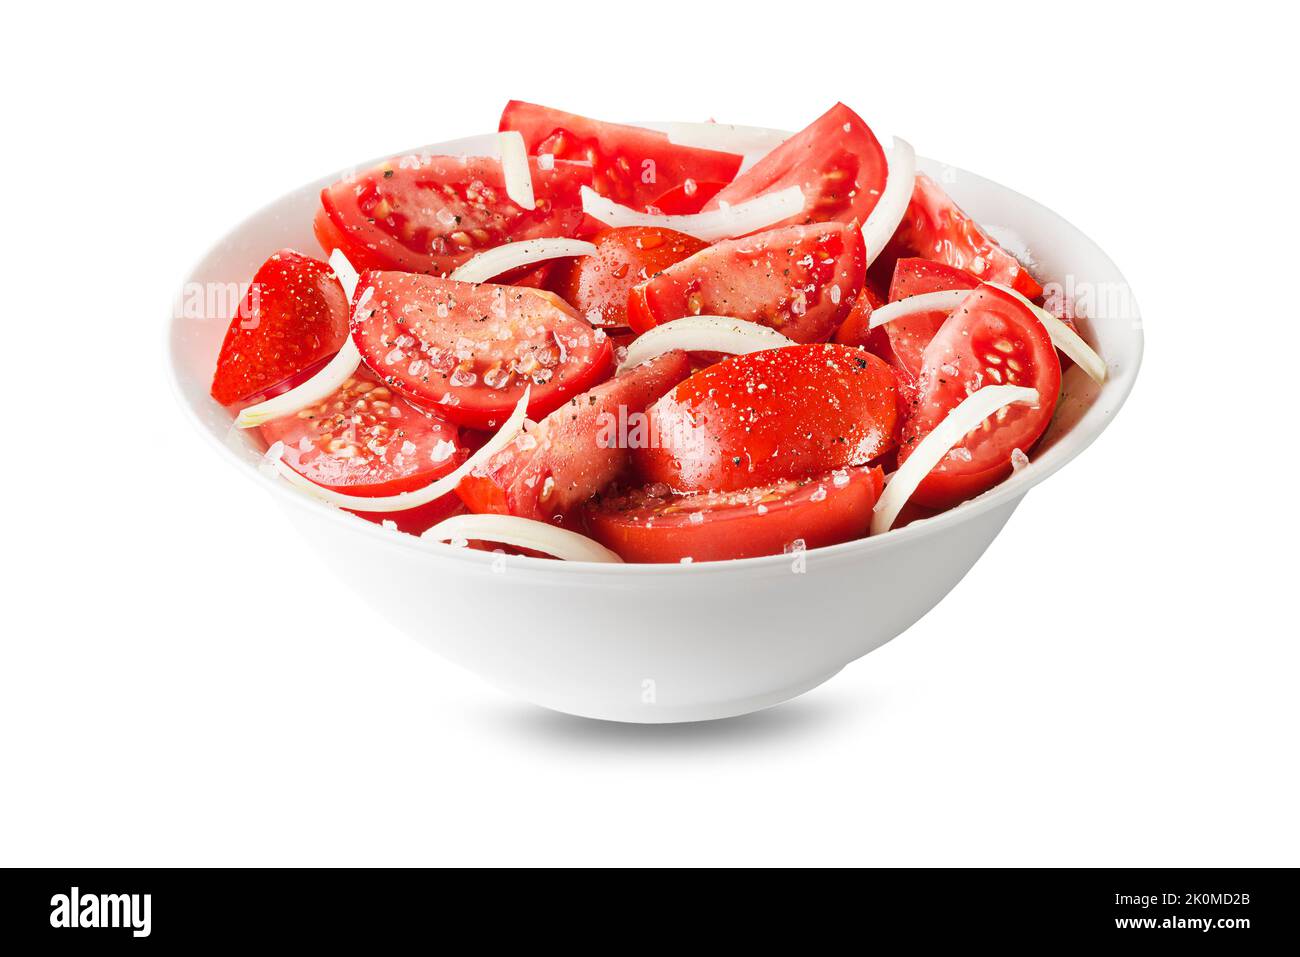 Fresh tomato salad isolated on white background. Concept for a tasty and healthy meal Stock Photo